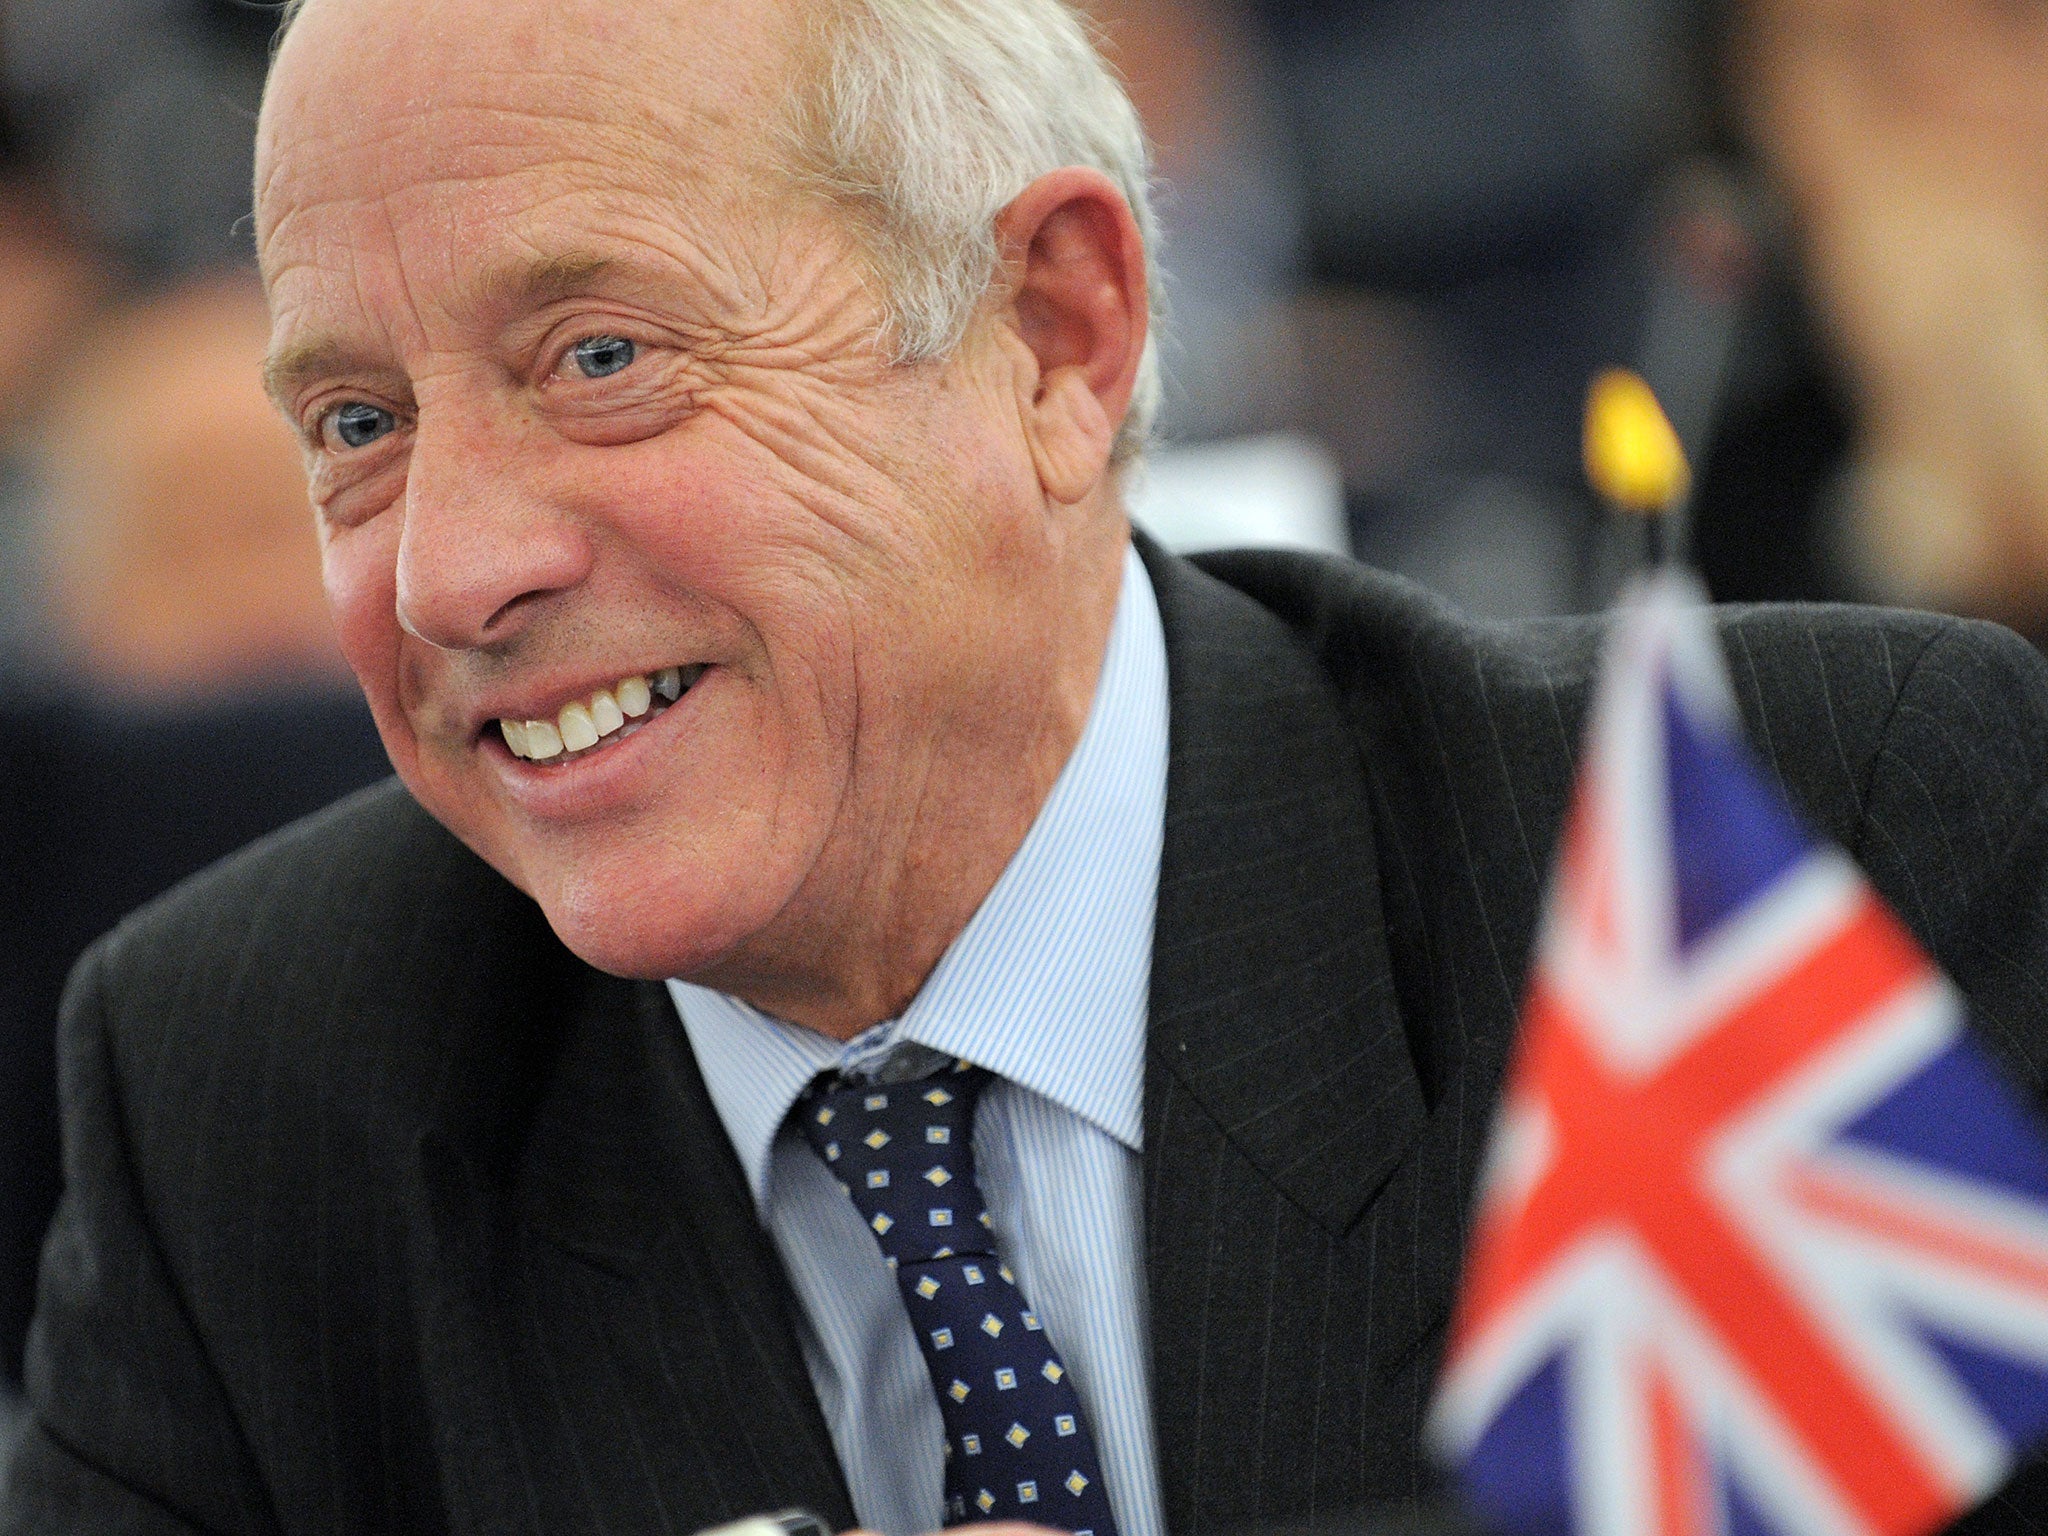 Former Ukip MEP Godfrey Bloom withdrew from the party after striking a journalist and calling
women ‘sluts’